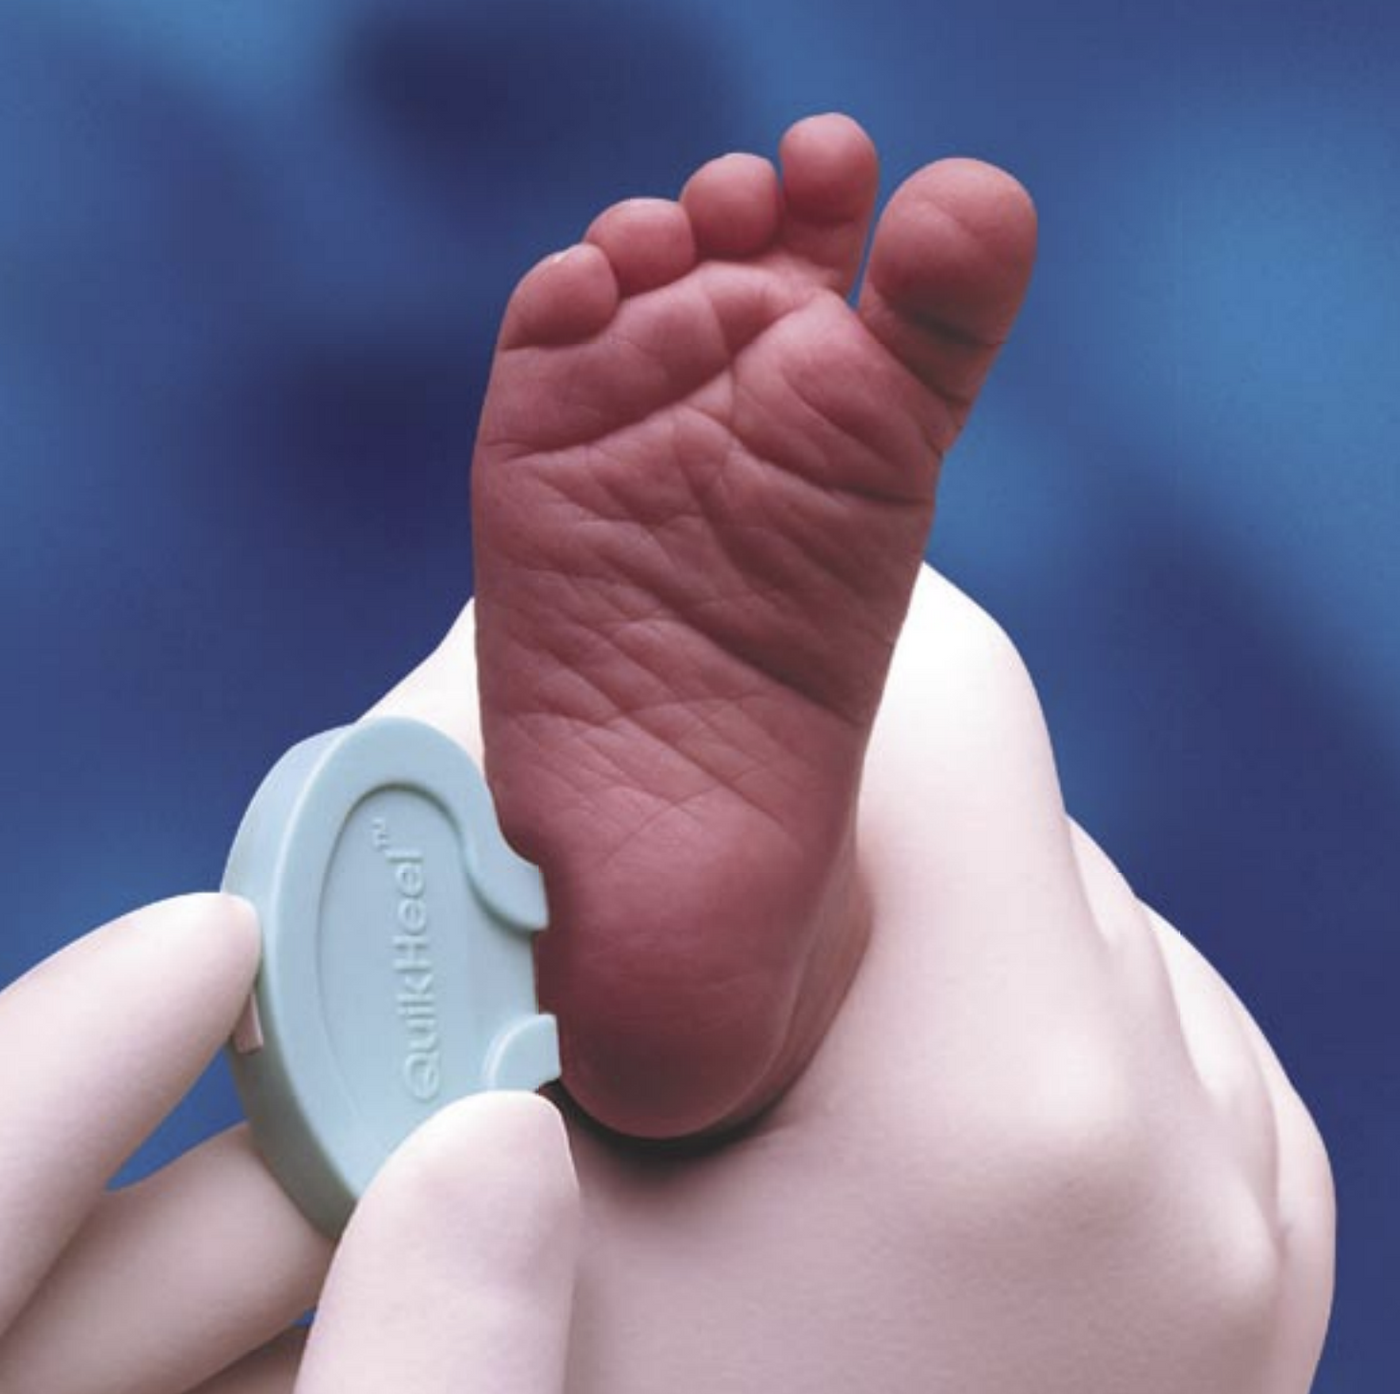 The heel prick test can help early detection and diagnosis of diseases in  newborns - Diag